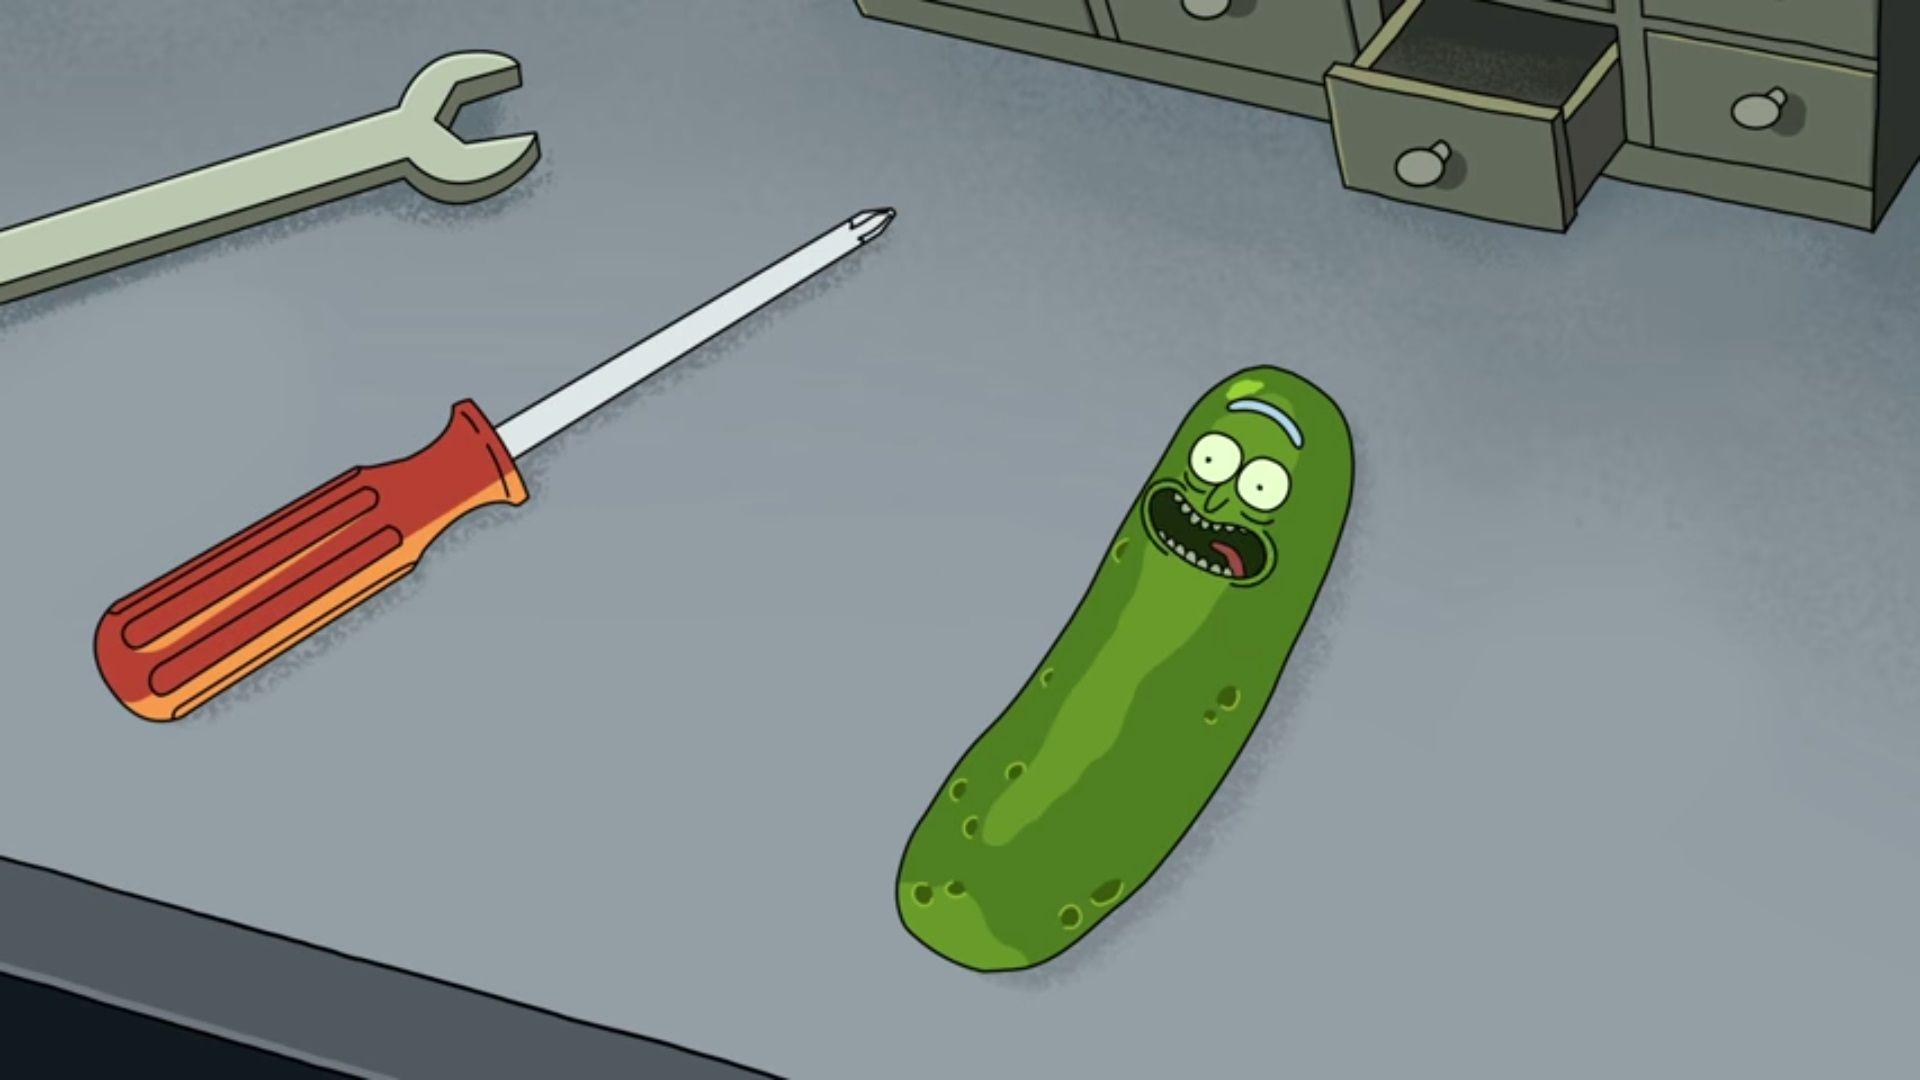 Free Download 1440p Rick And Morty Wallpaper Pickle Hd Image